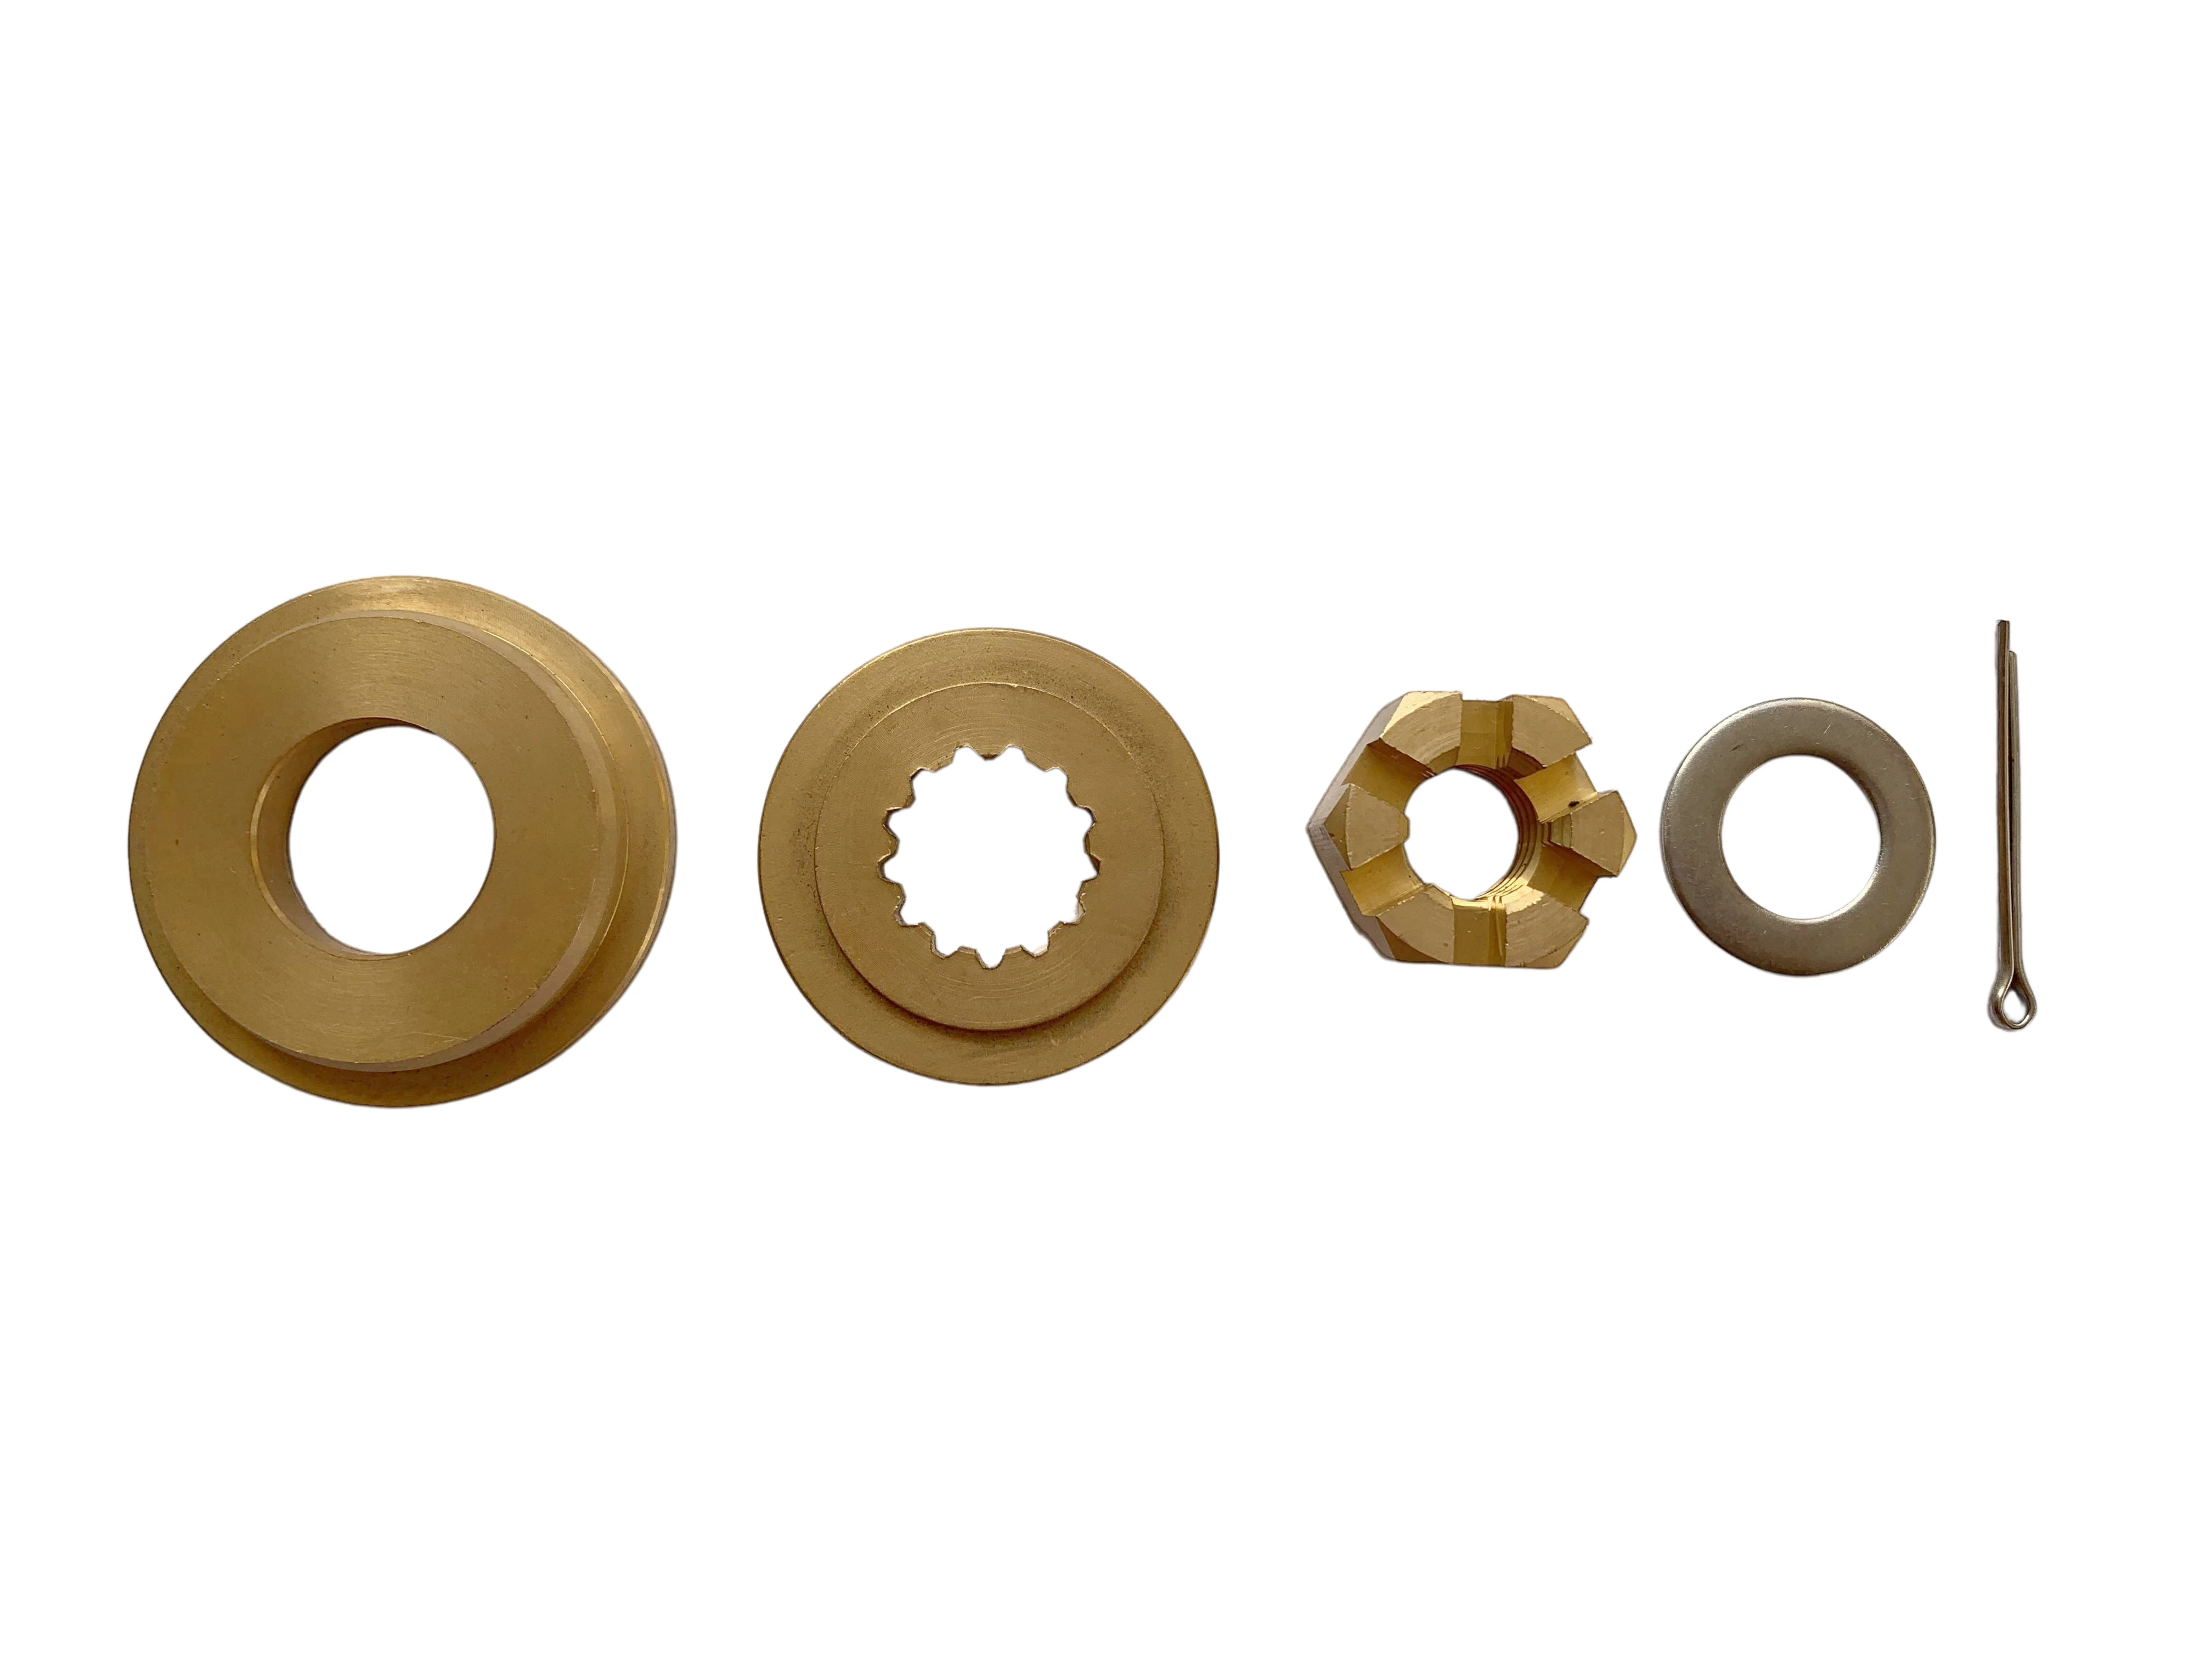 Propeller Installation Hardware Kits fit JOHNSON 40HP-75HP Outboard Motos Thrust Washer/Spacer/Washer/Nut/Cotter Pin Included